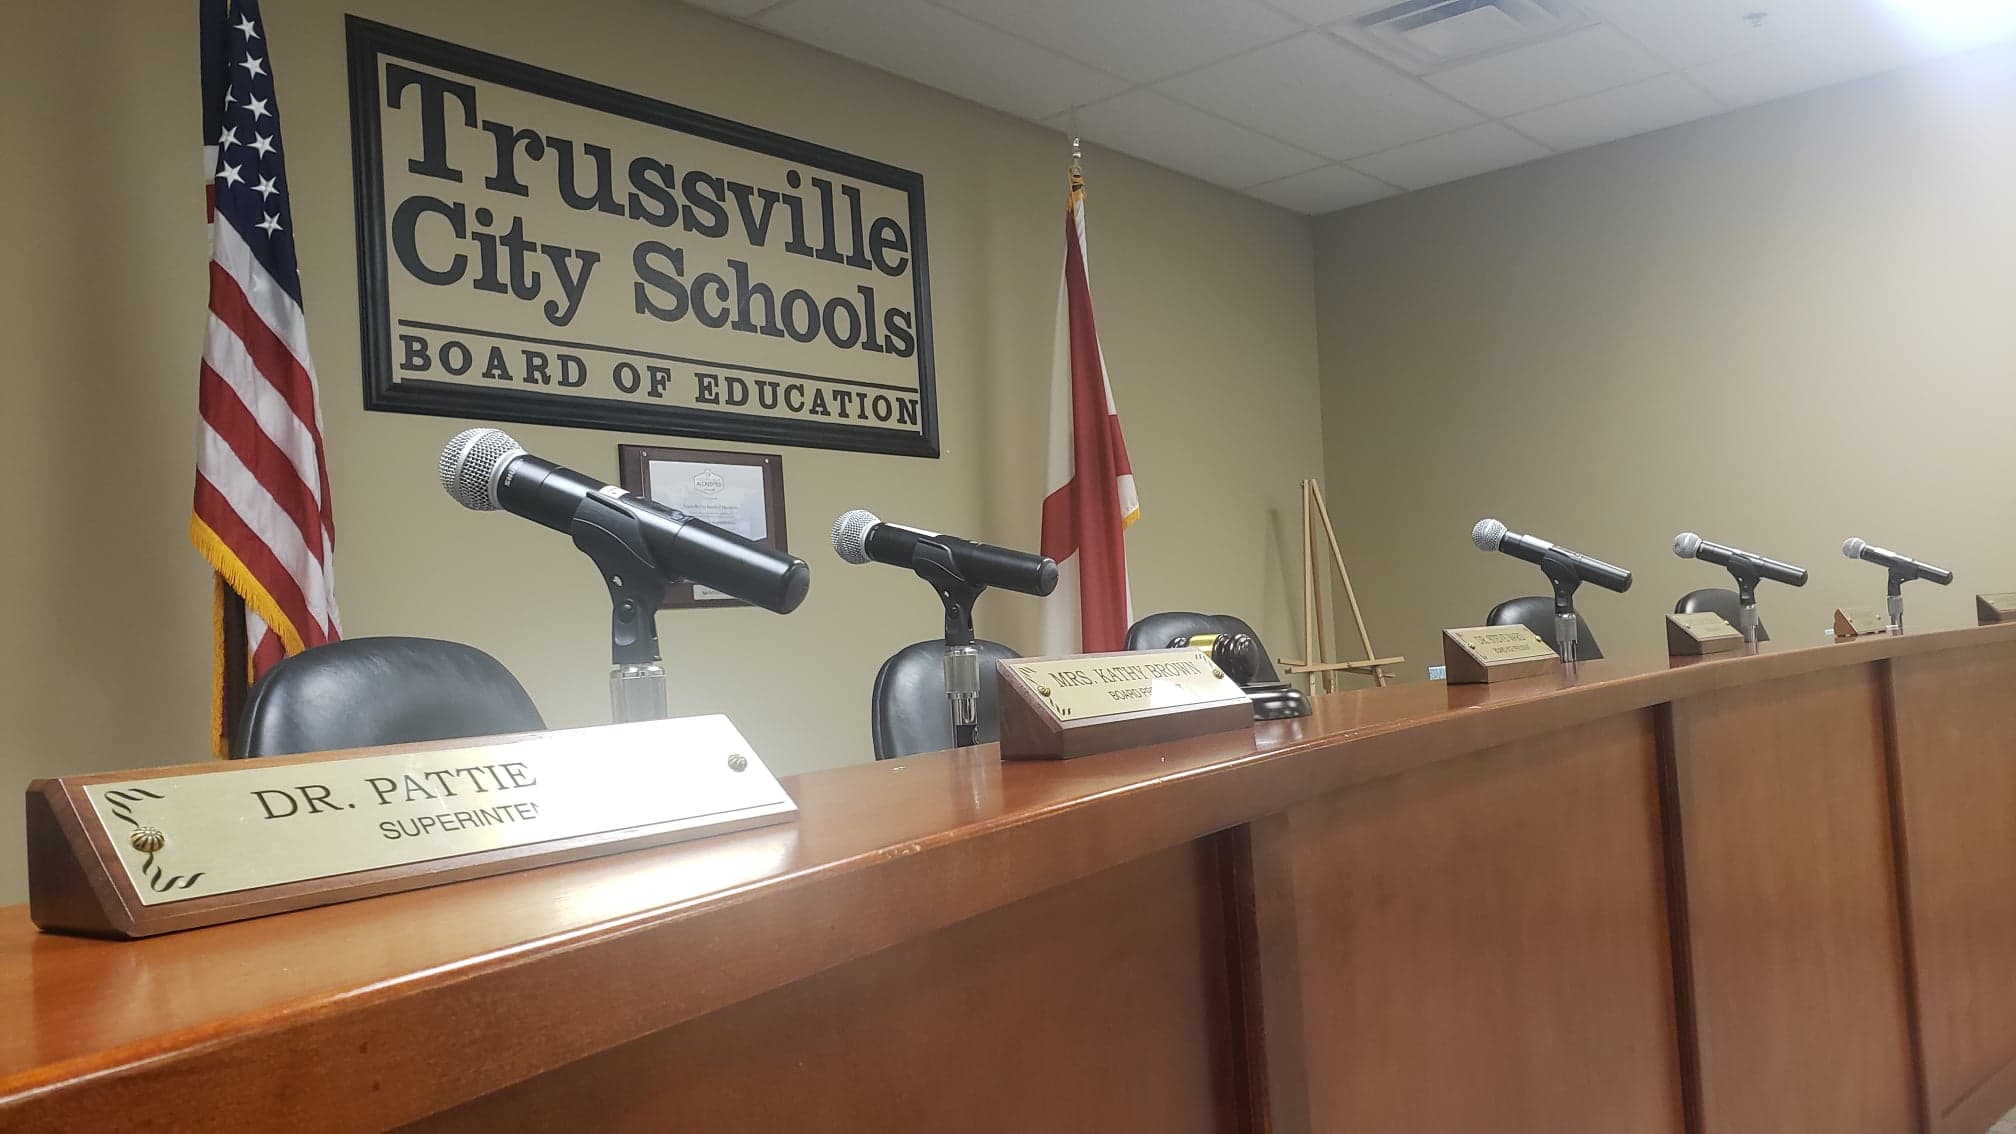 VIDEO: Plans to reopen Trussville City Schools; students will have 3 options